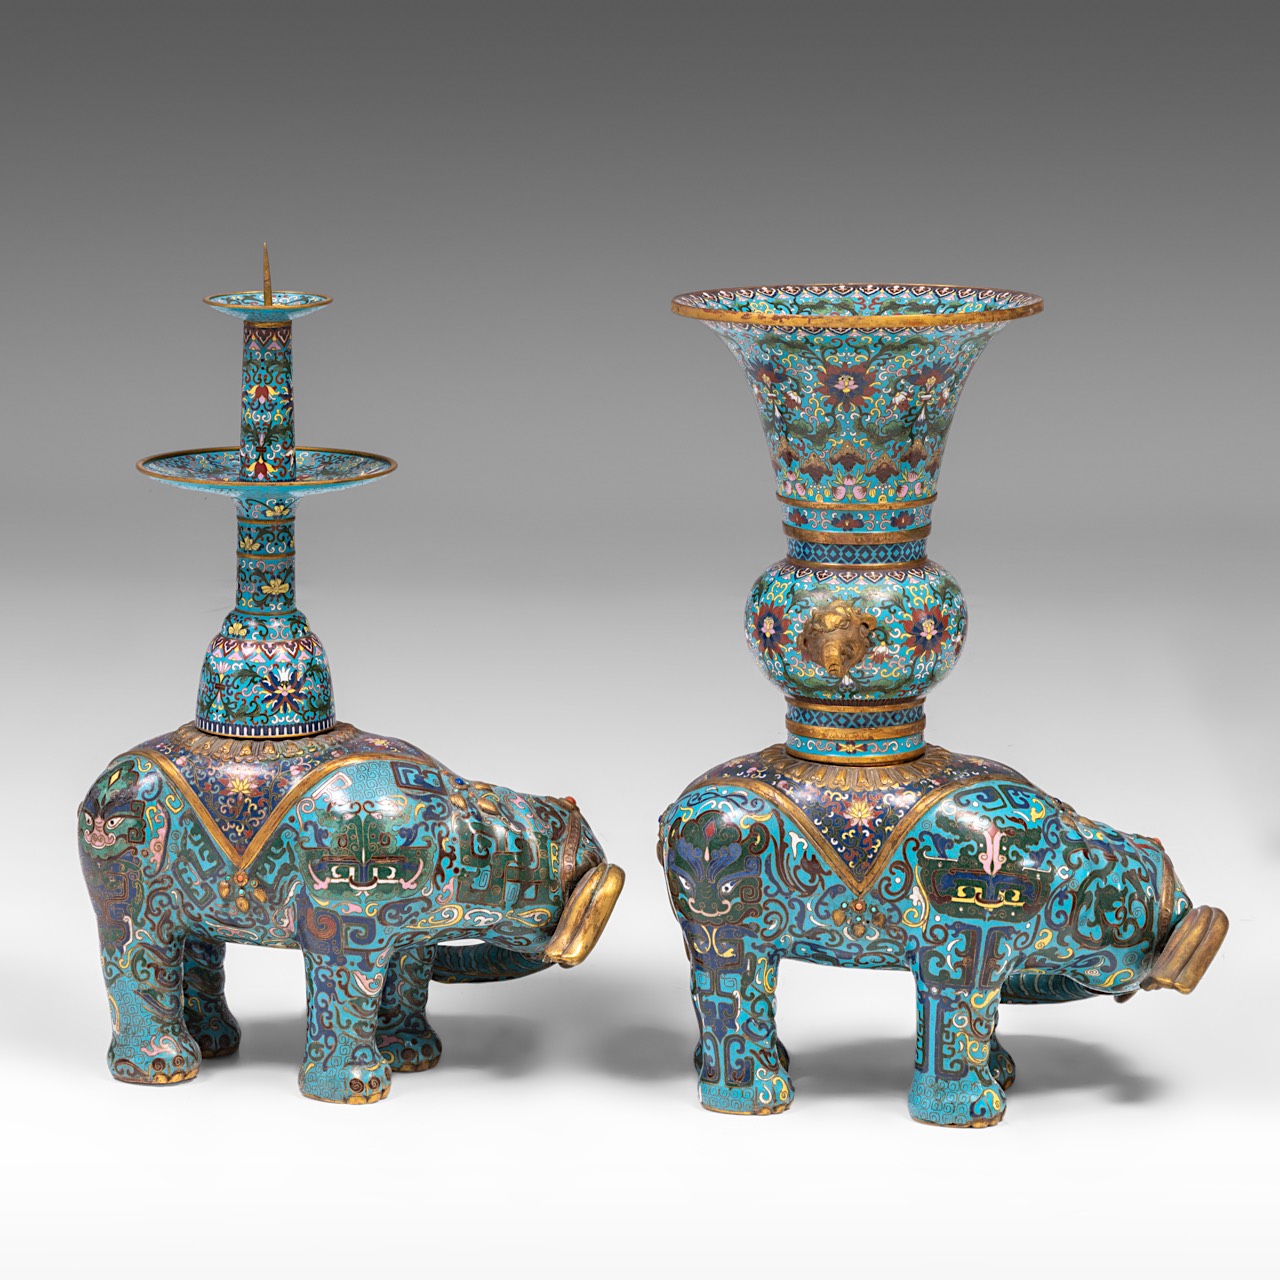 A Chinese five-piece semi-precious stone inlaid cloisonne garniture, late Qing/20thC, tallest H 58 - - Image 20 of 24